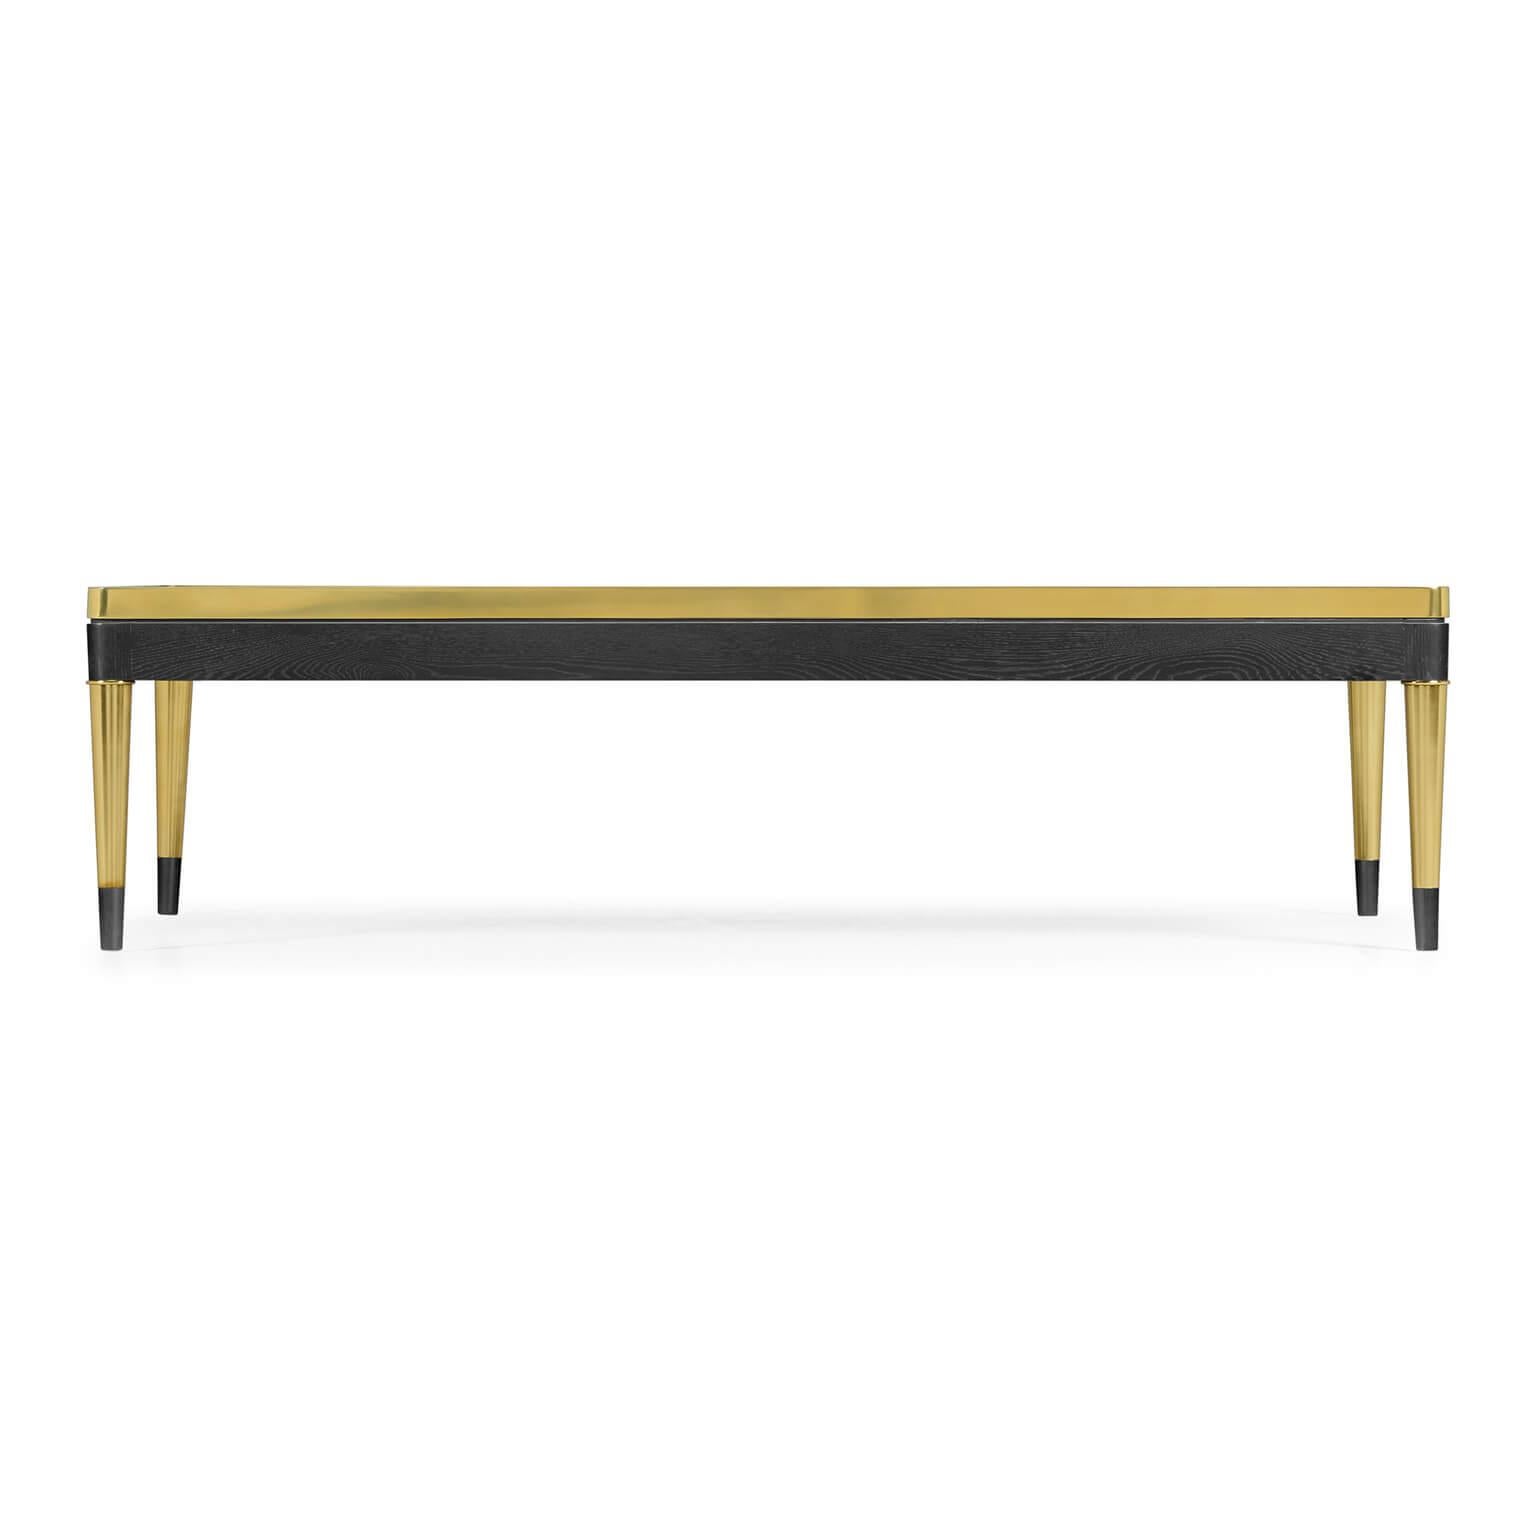 Mid-Century Modern style marble top rectangular coffee table with brass trim and an ebonized oak frame on round tapered legs.

Dimensions: 60